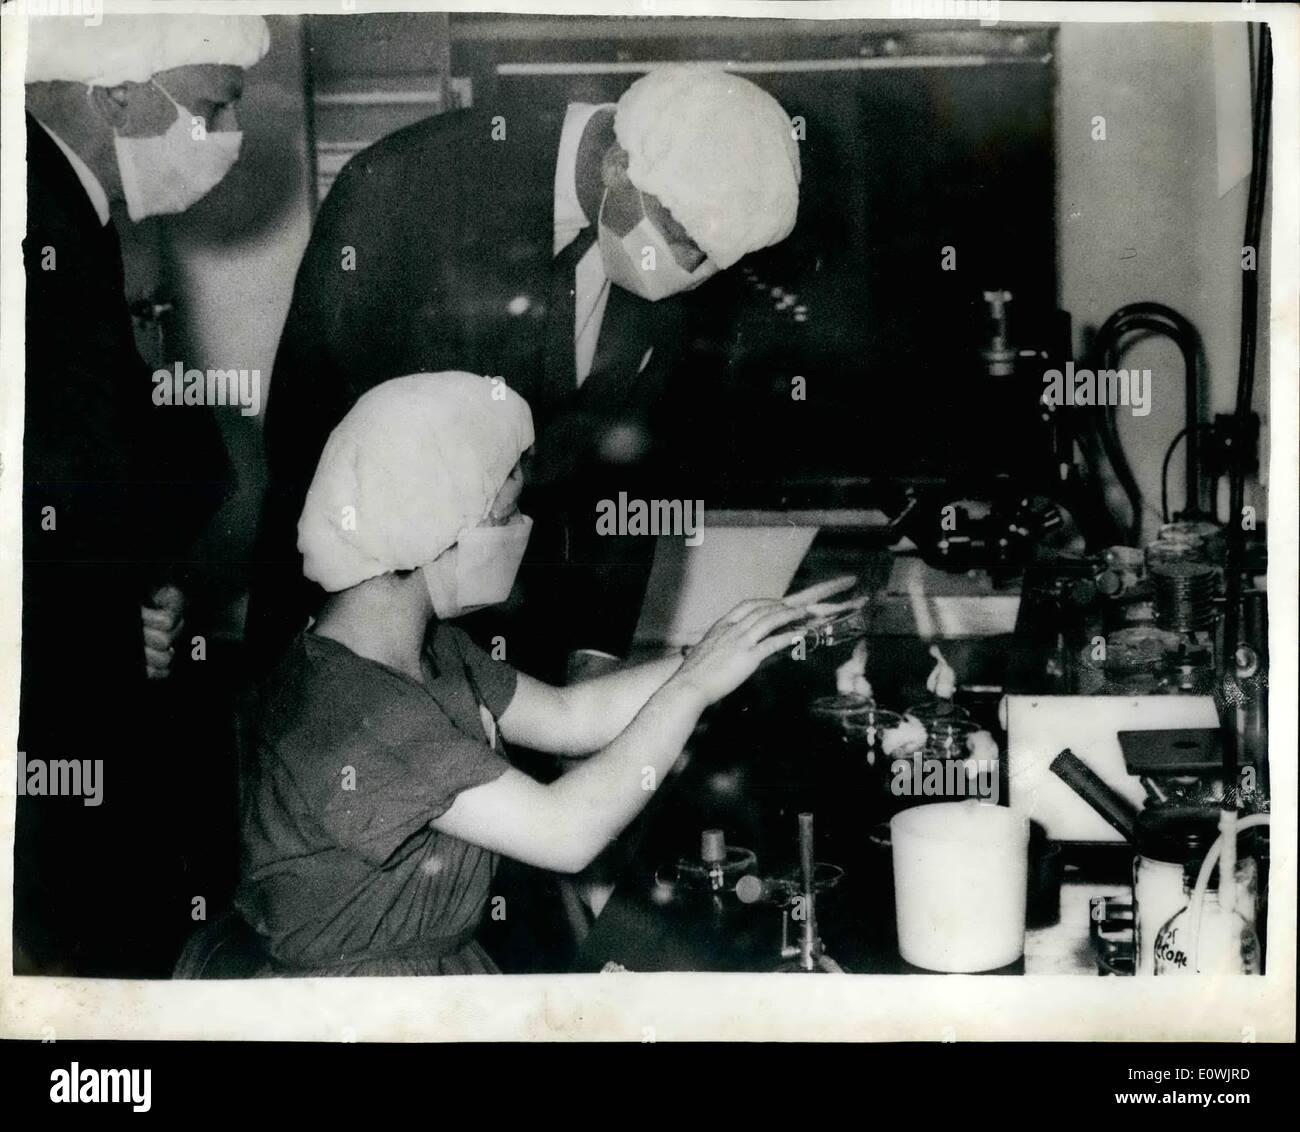 Jun. 06, 1963 - Can you recognise him?: Prince Philip wearing a mask and hat examines an item being shown to him by Miss Beryl Maders, a junior technician, while he was inspecting the Tissue culture laboratory during his visit to the National Spastics Society's Child Health Research Unit at Cameron House Guy's Hospital today. The duke is president of the society. Stock Photo